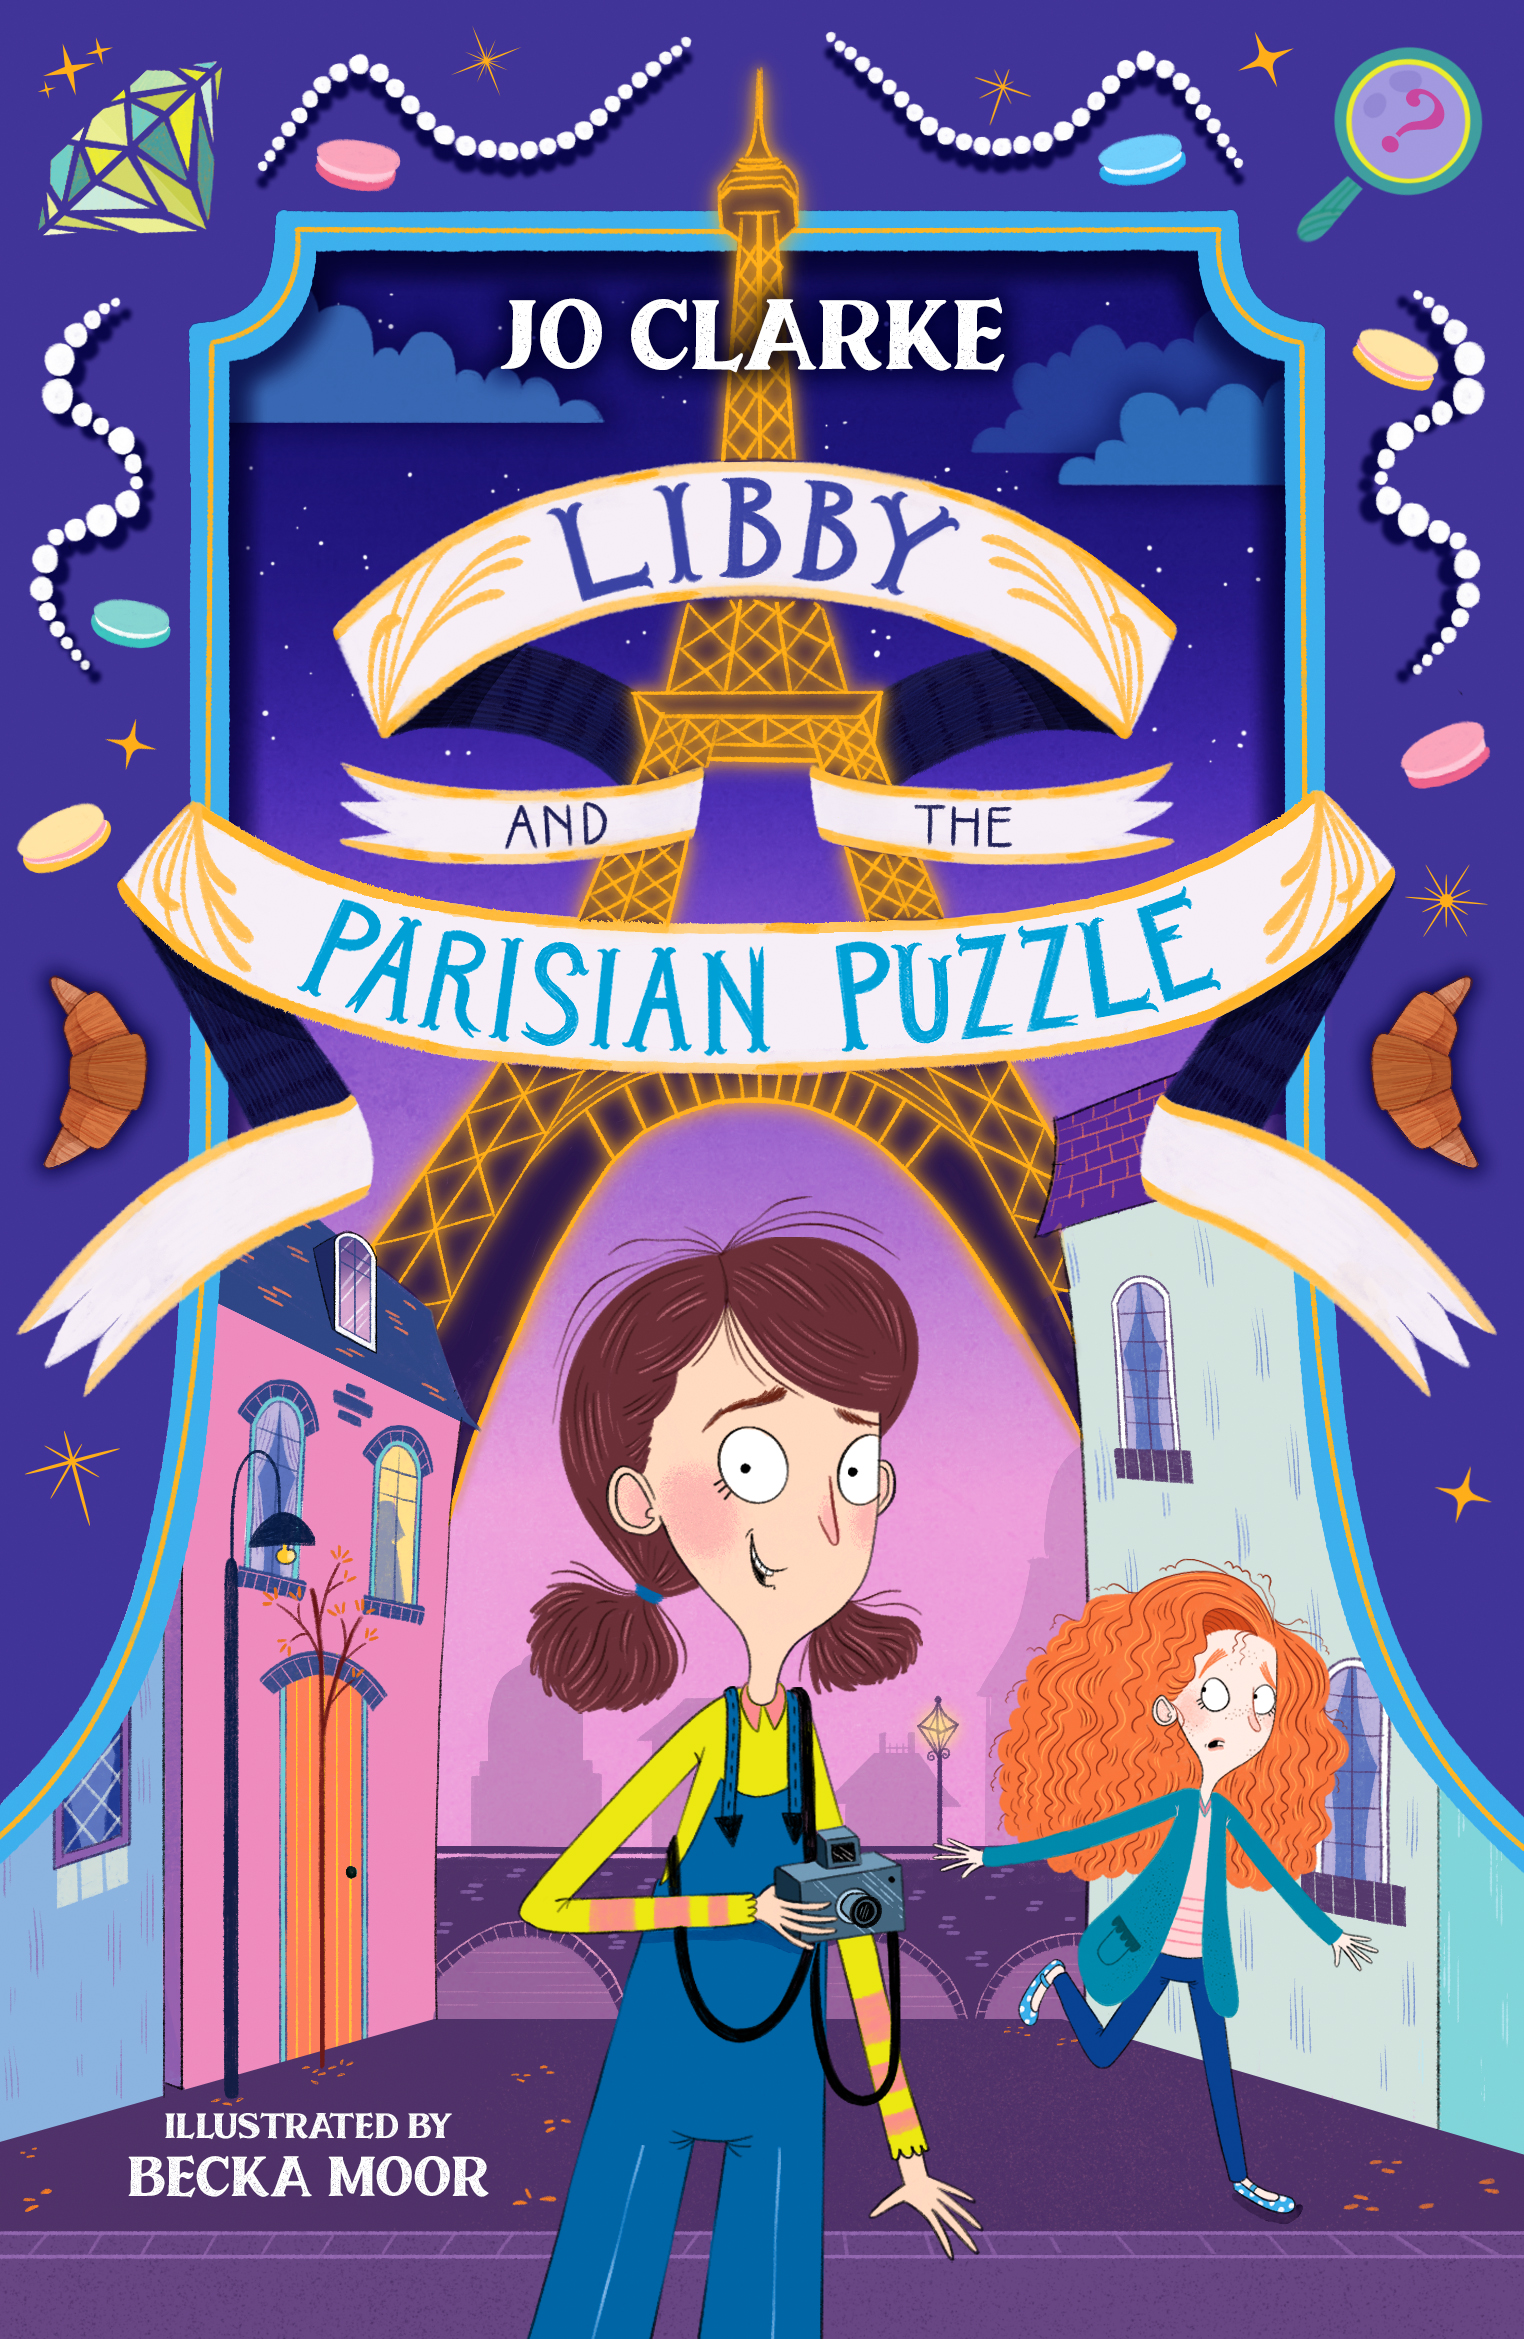 Libby and the Parisian Puzzle cover - illustrated by Becka Moor